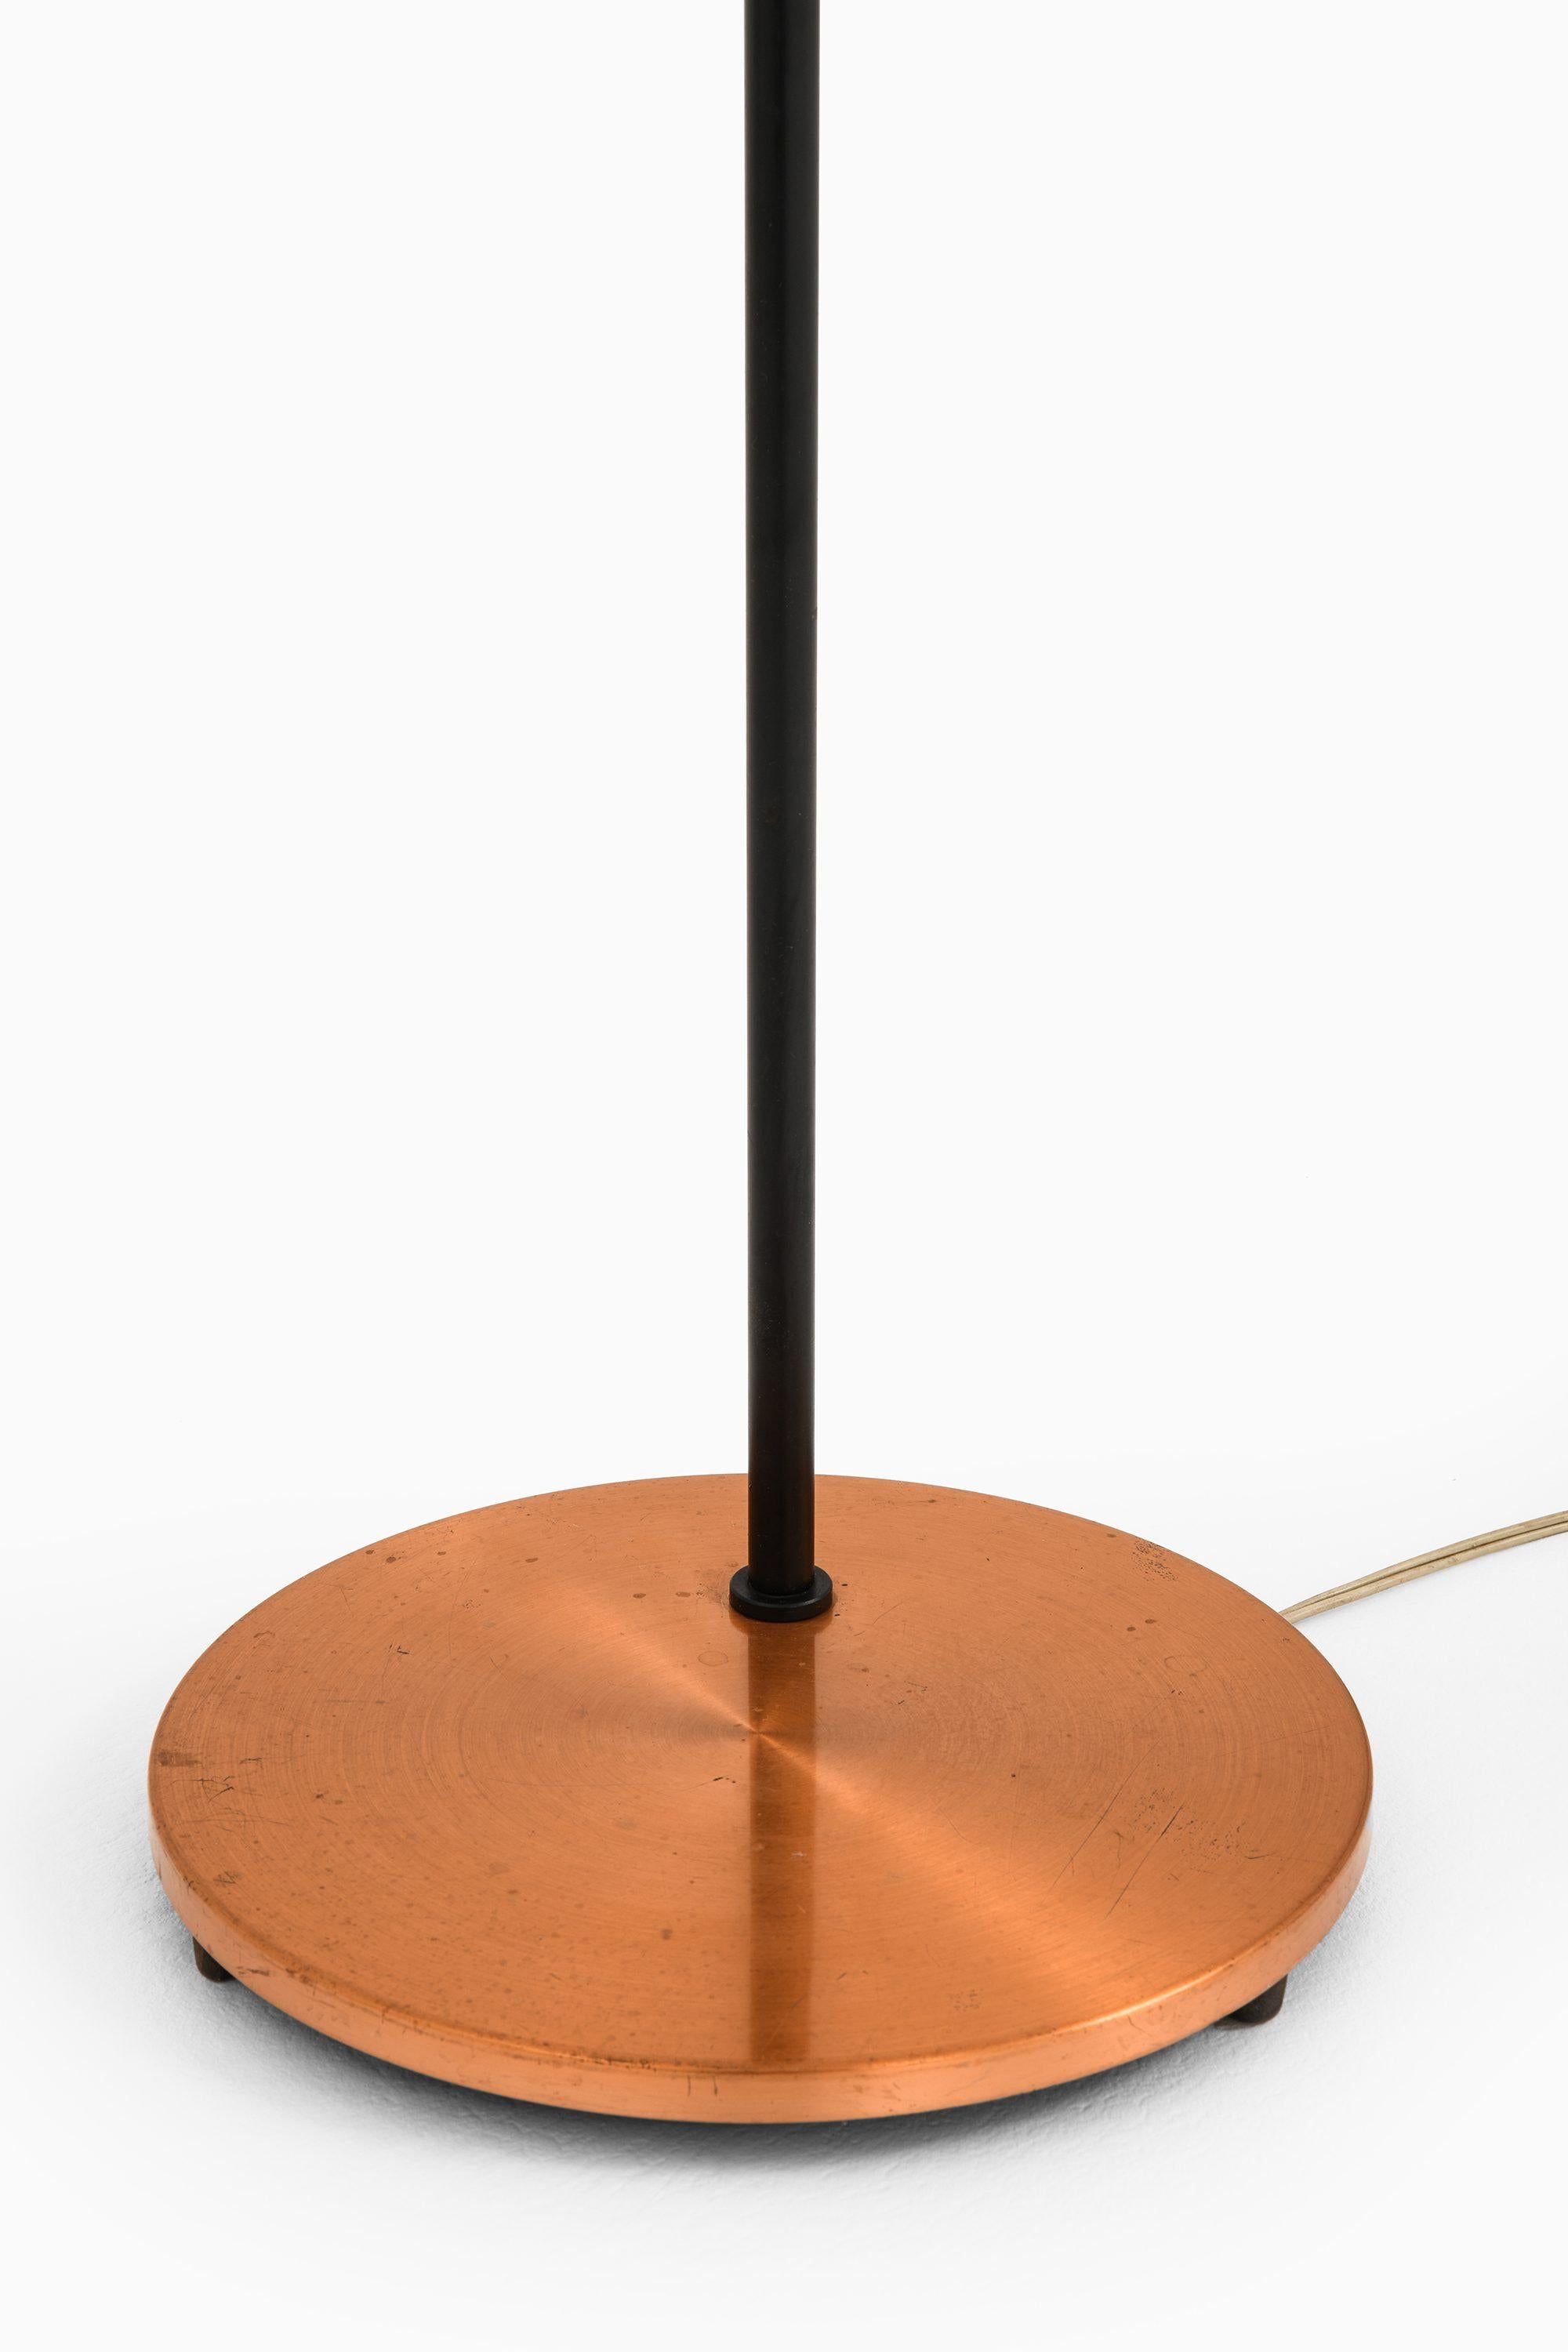 Scandinavian Modern Floor Lamp in Black Lacquered Metal, Copper and Teak by Jo Hammerborg, 1950's For Sale